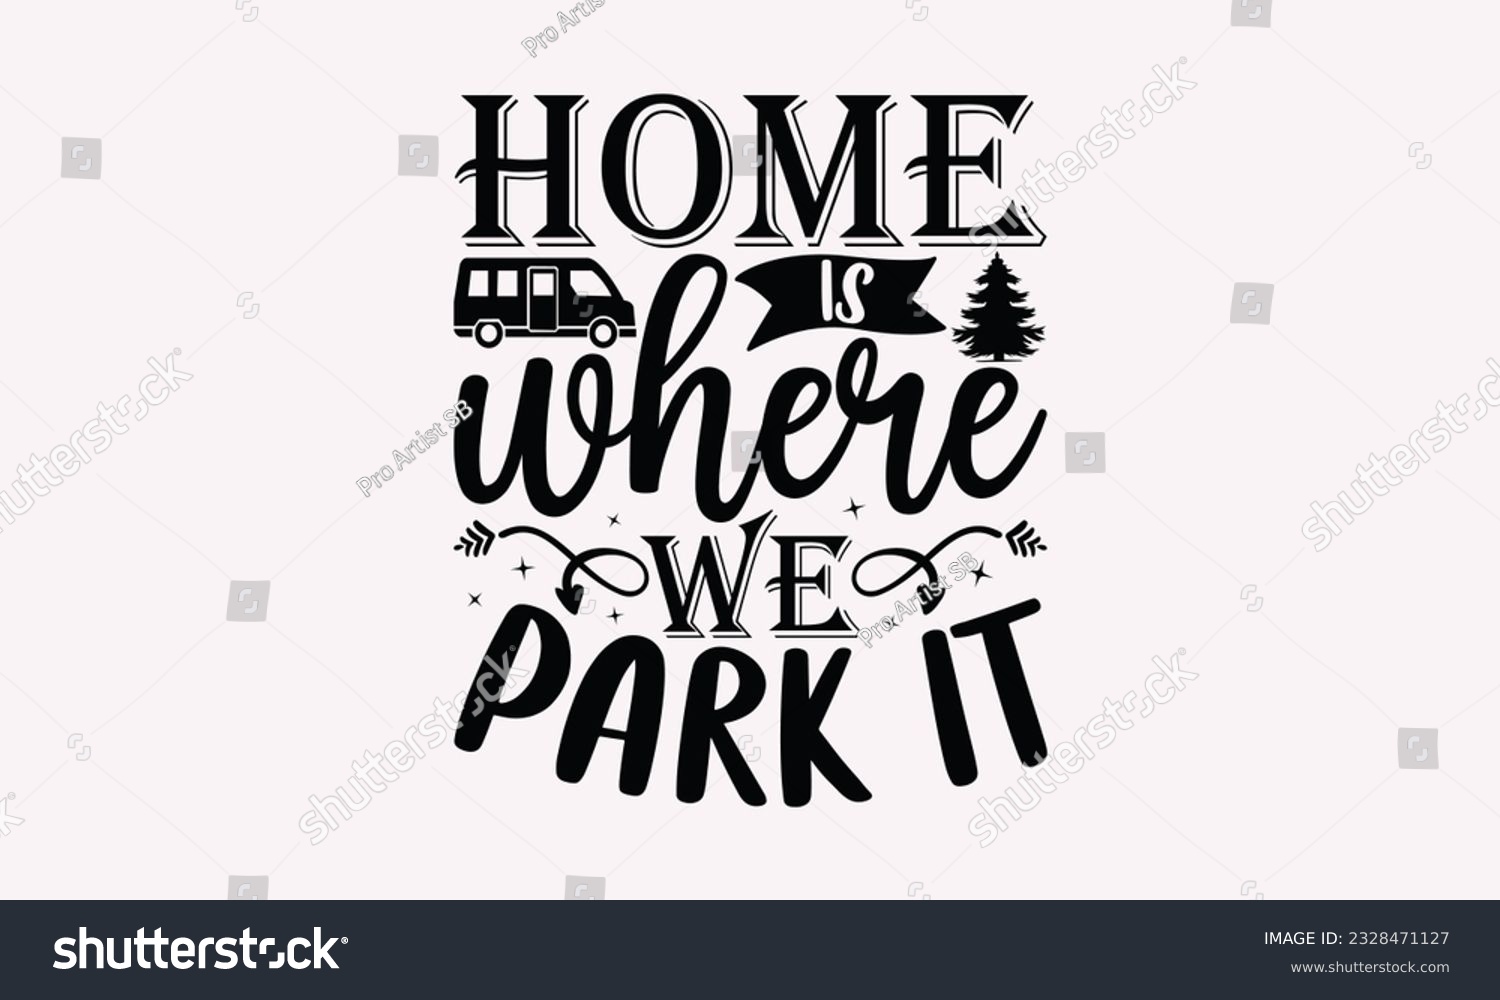 SVG of Home is where we park it - Camping SVG Design, Print on T-Shirts, Mugs, Birthday Cards, Wall Decals, Stickers, Birthday Party Decorations, Cuts and More Use. svg